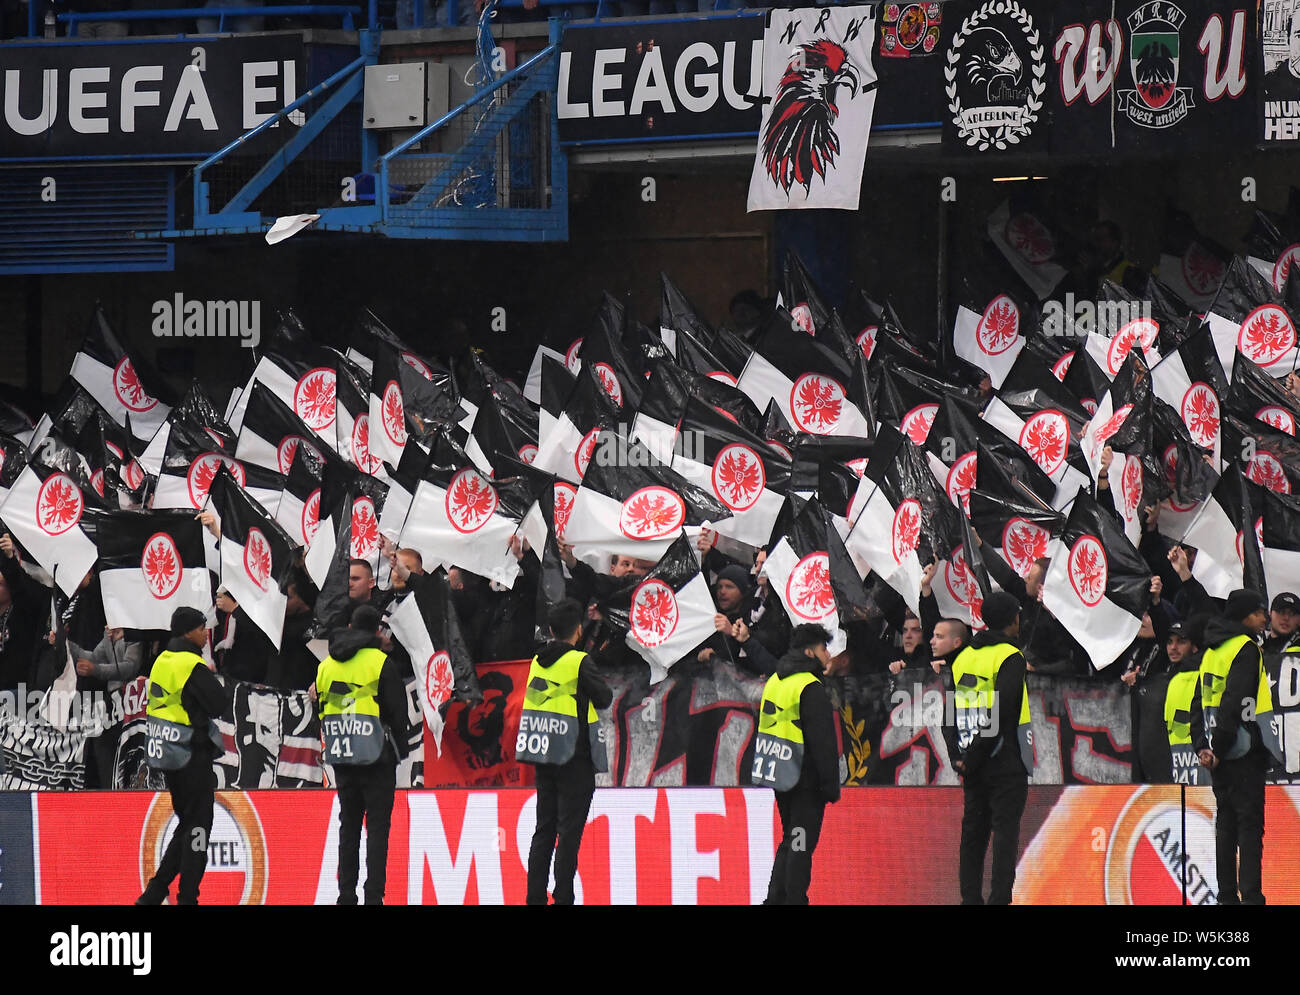 LONDON, ENGLAND - MAY 9, 2019: Eintrach ultras pictured prior to the second leg of the 2018/19 UEFA Europa League Semi-Finals game between Chelsea FC (England) and Eintracht Frankfurt e.V. (Germany) at Stamford Bridge. Stock Photo